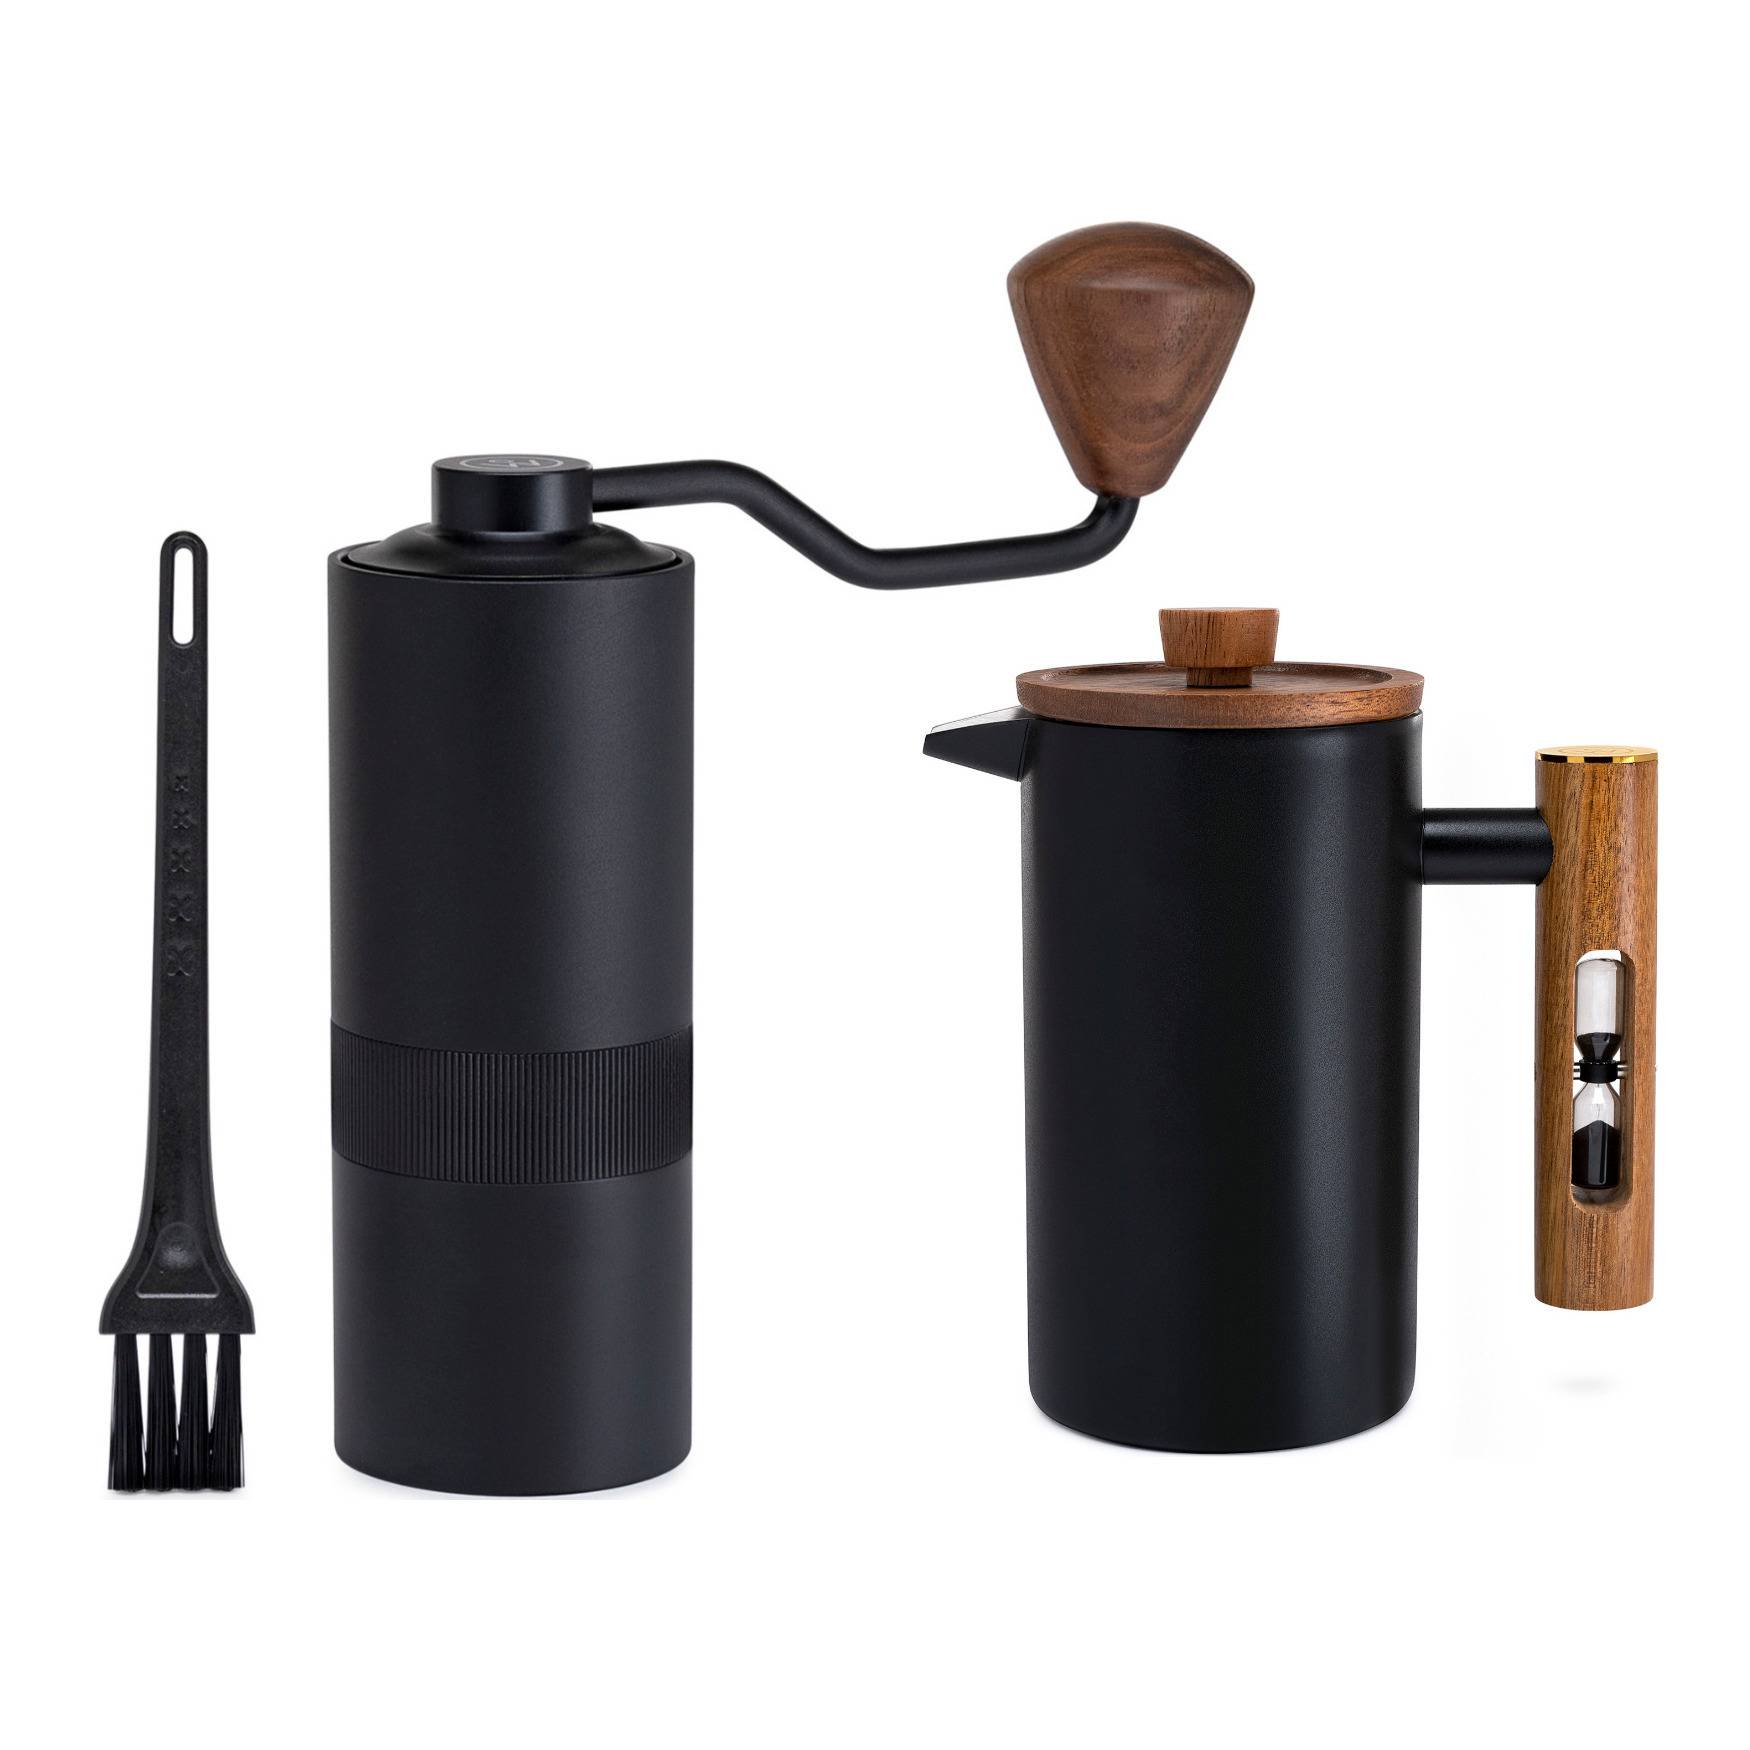 ChefWave Coffee Bundle Set – 34-oz French Press Coffee Maker and Manual Conical Burr Coffee Grinder